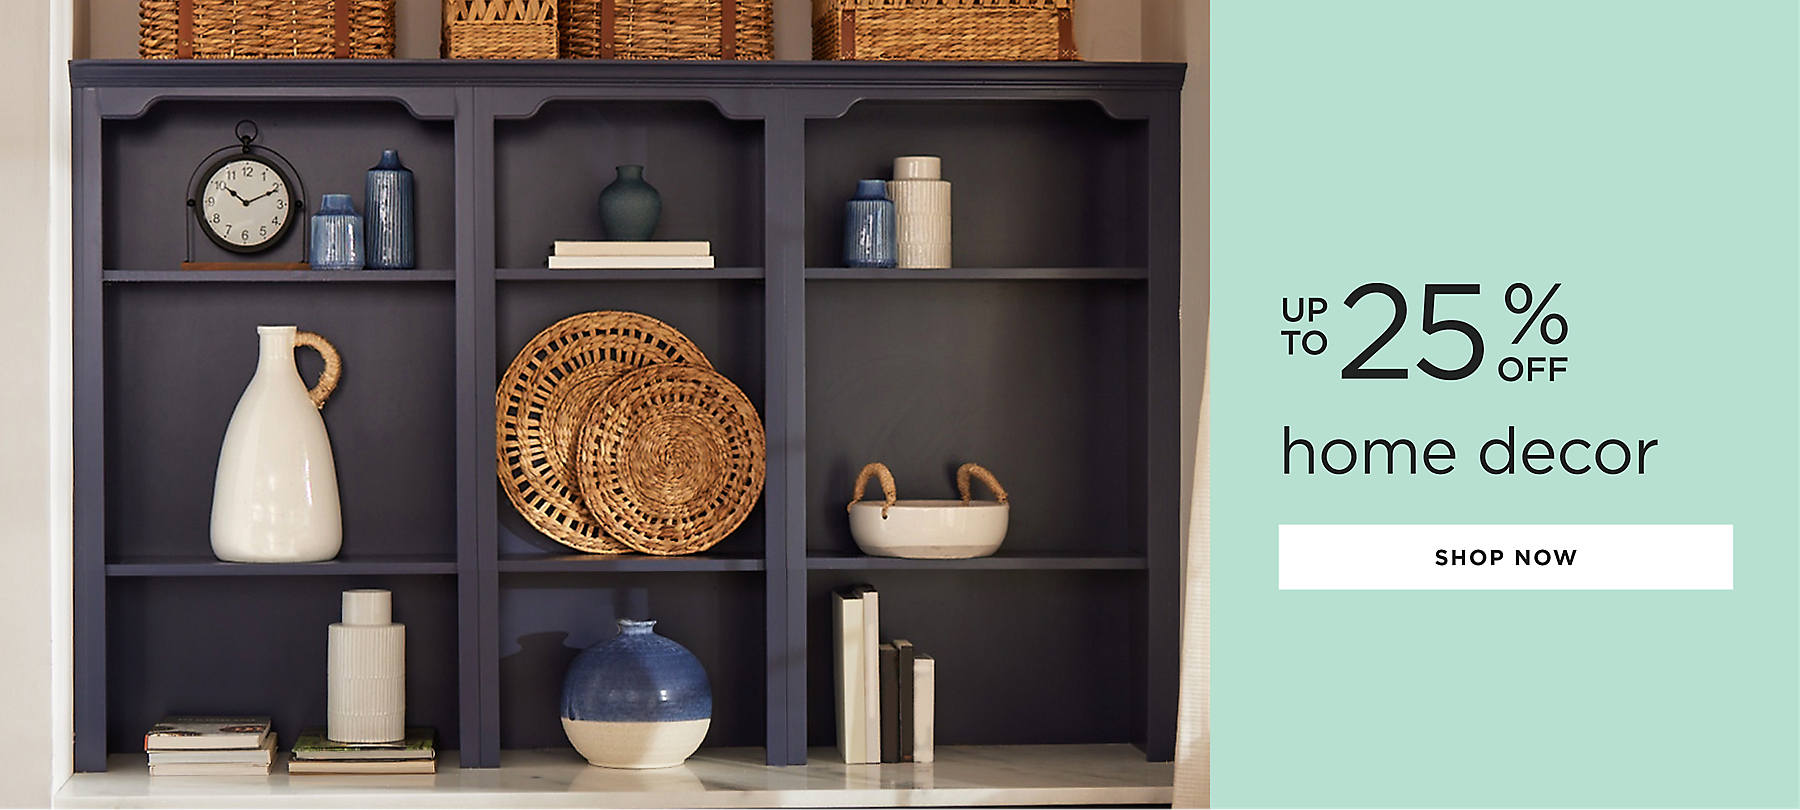 home decor up to 25% off shop now